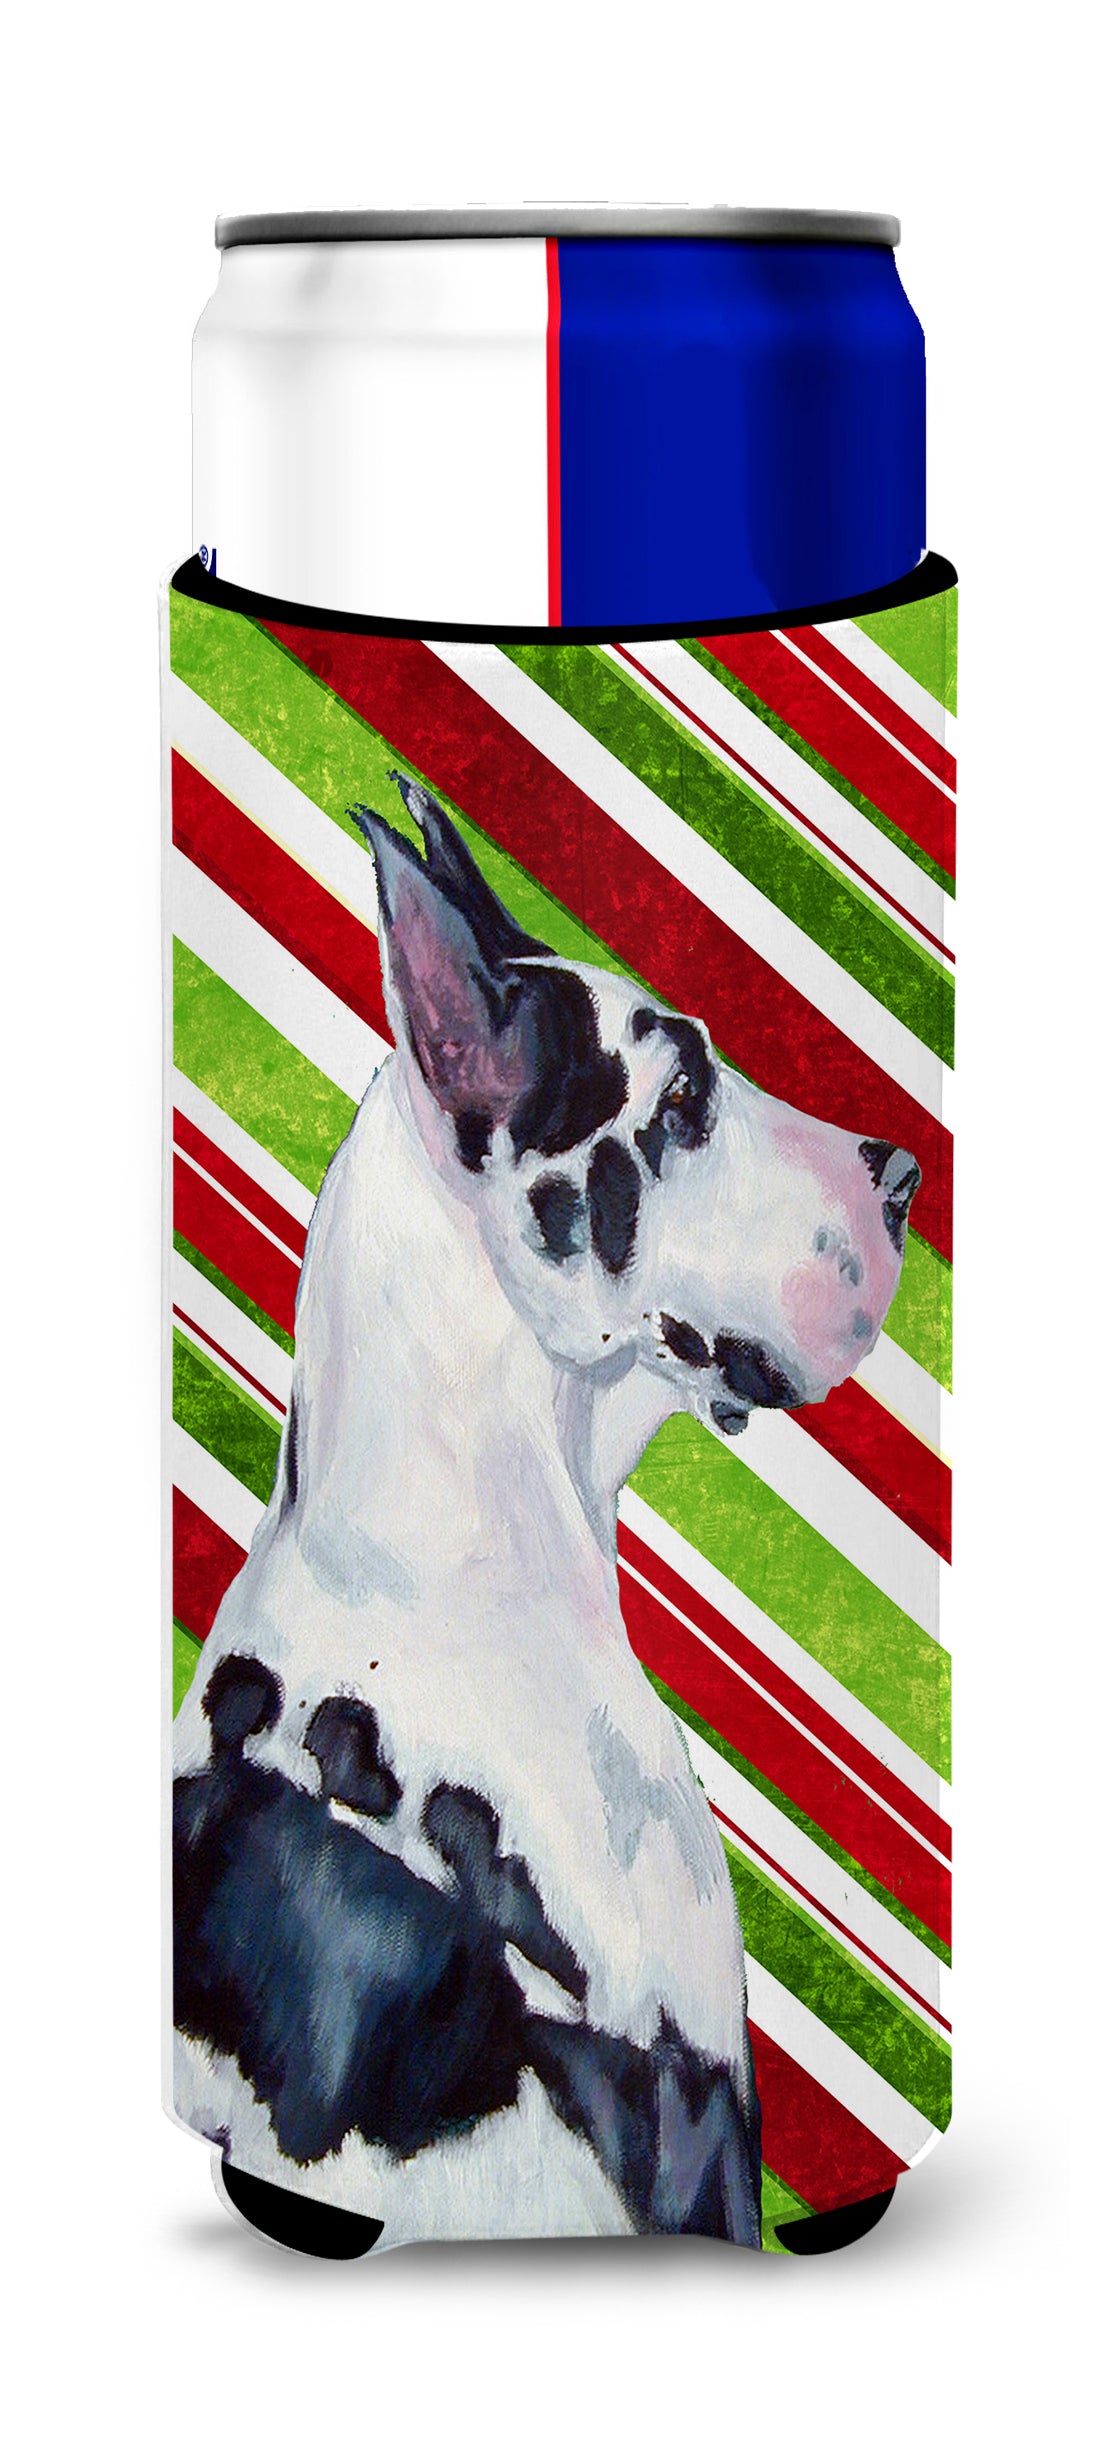 Great Dane Candy Cane Holiday Christmas Ultra Beverage Insulators for slim cans LH9236MUK